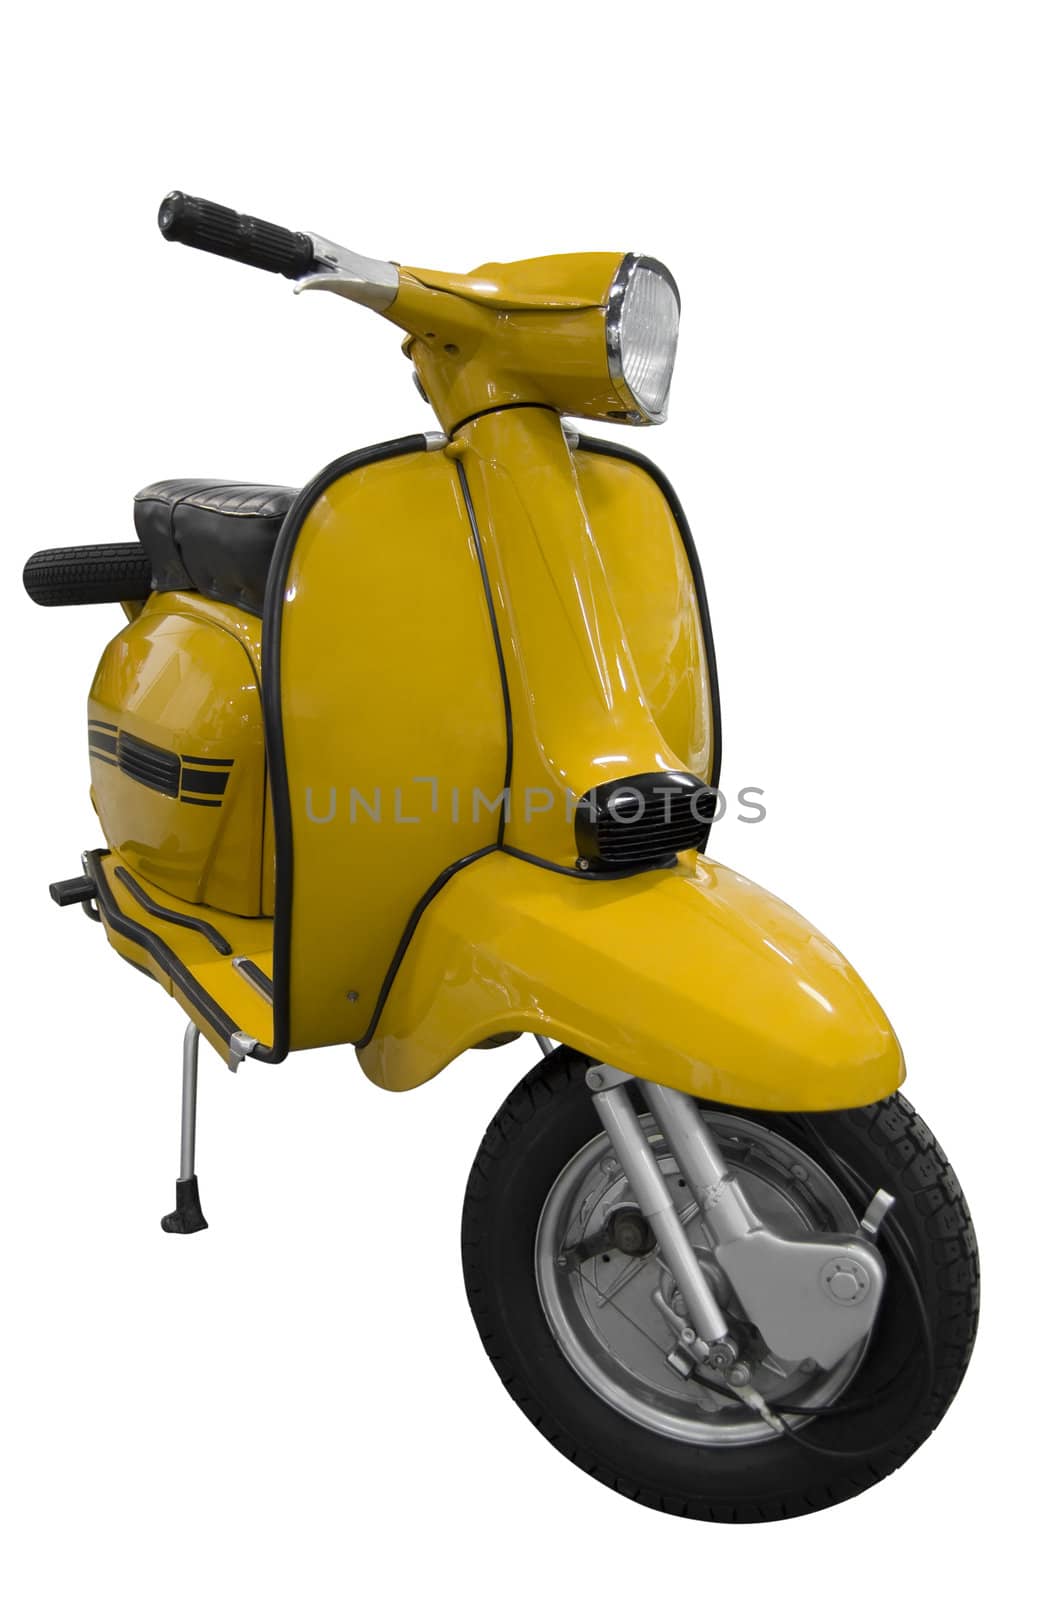 Vintage black and yellow scooter (path included) by simas2